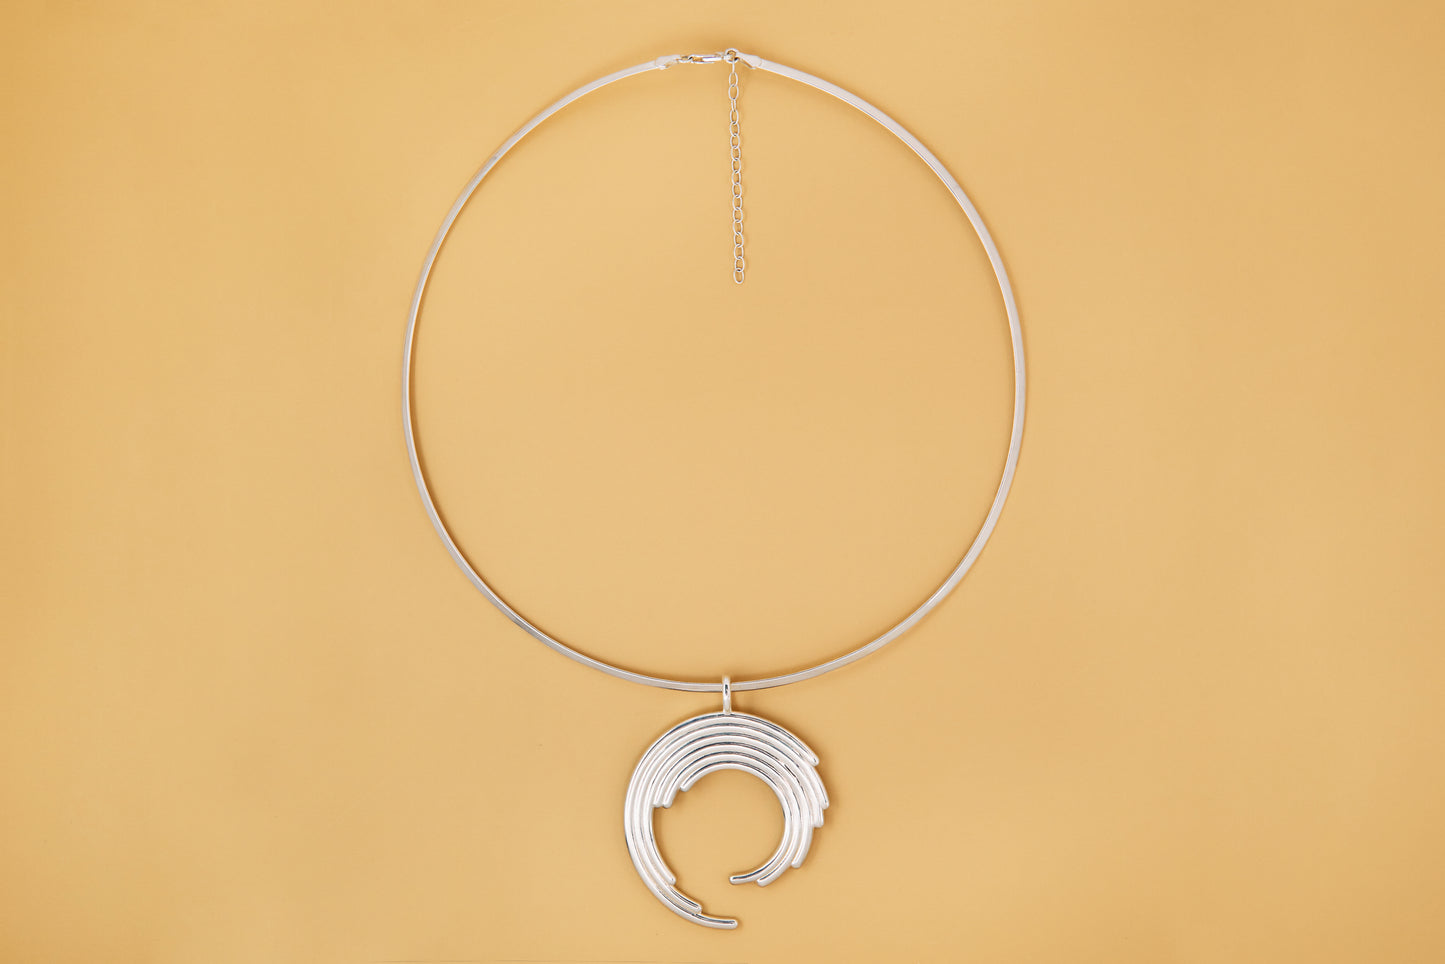 The Large O Necklace